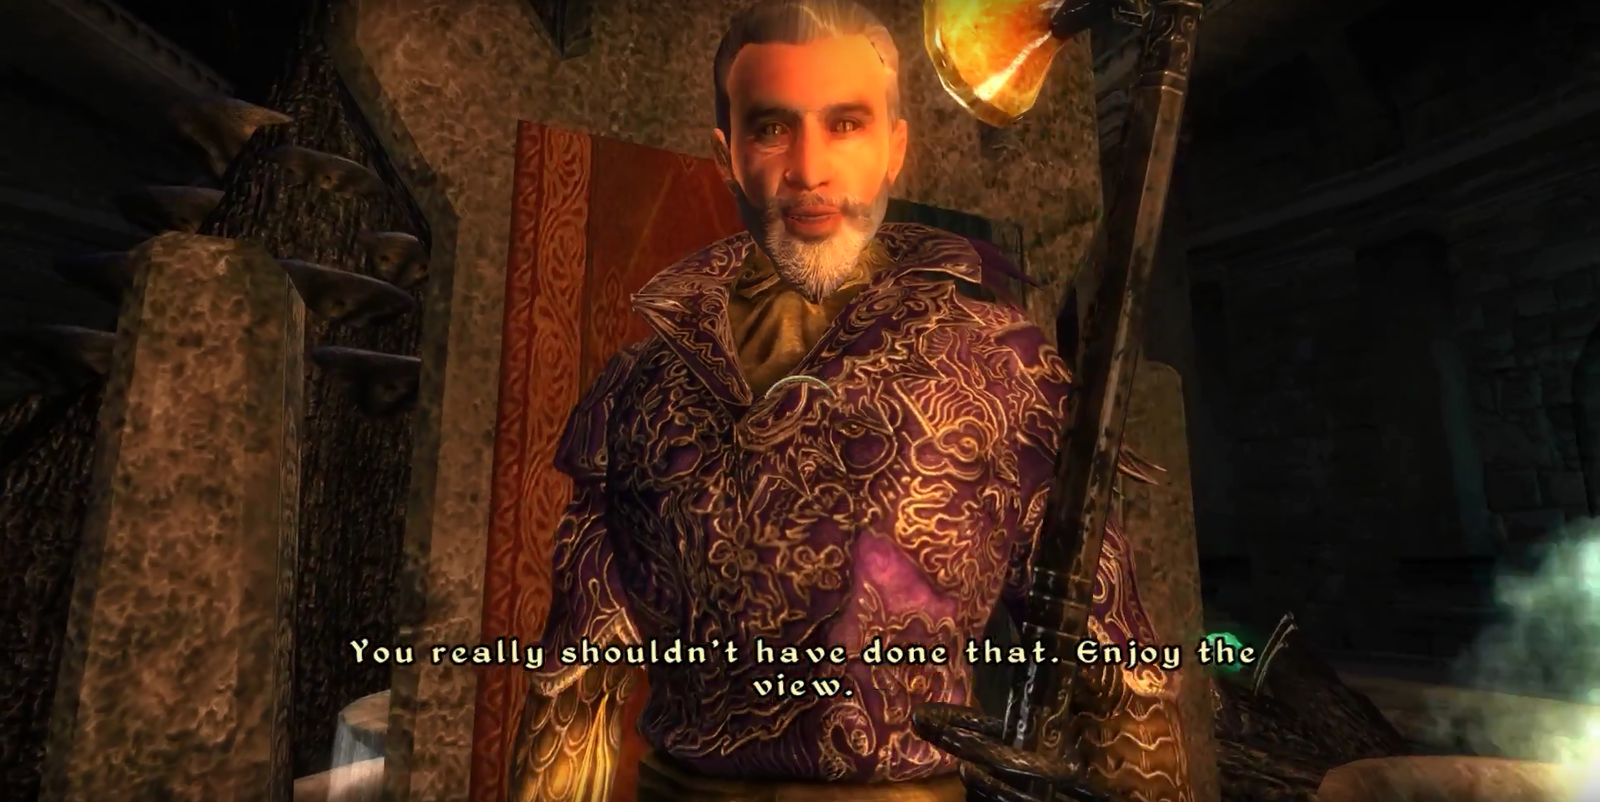 When, according to the recommendations on the Internet, I climbed into the BIOS, not understanding a damn thing about it - The Elder Scrolls IV: Oblivion, Sheogorath, Bios